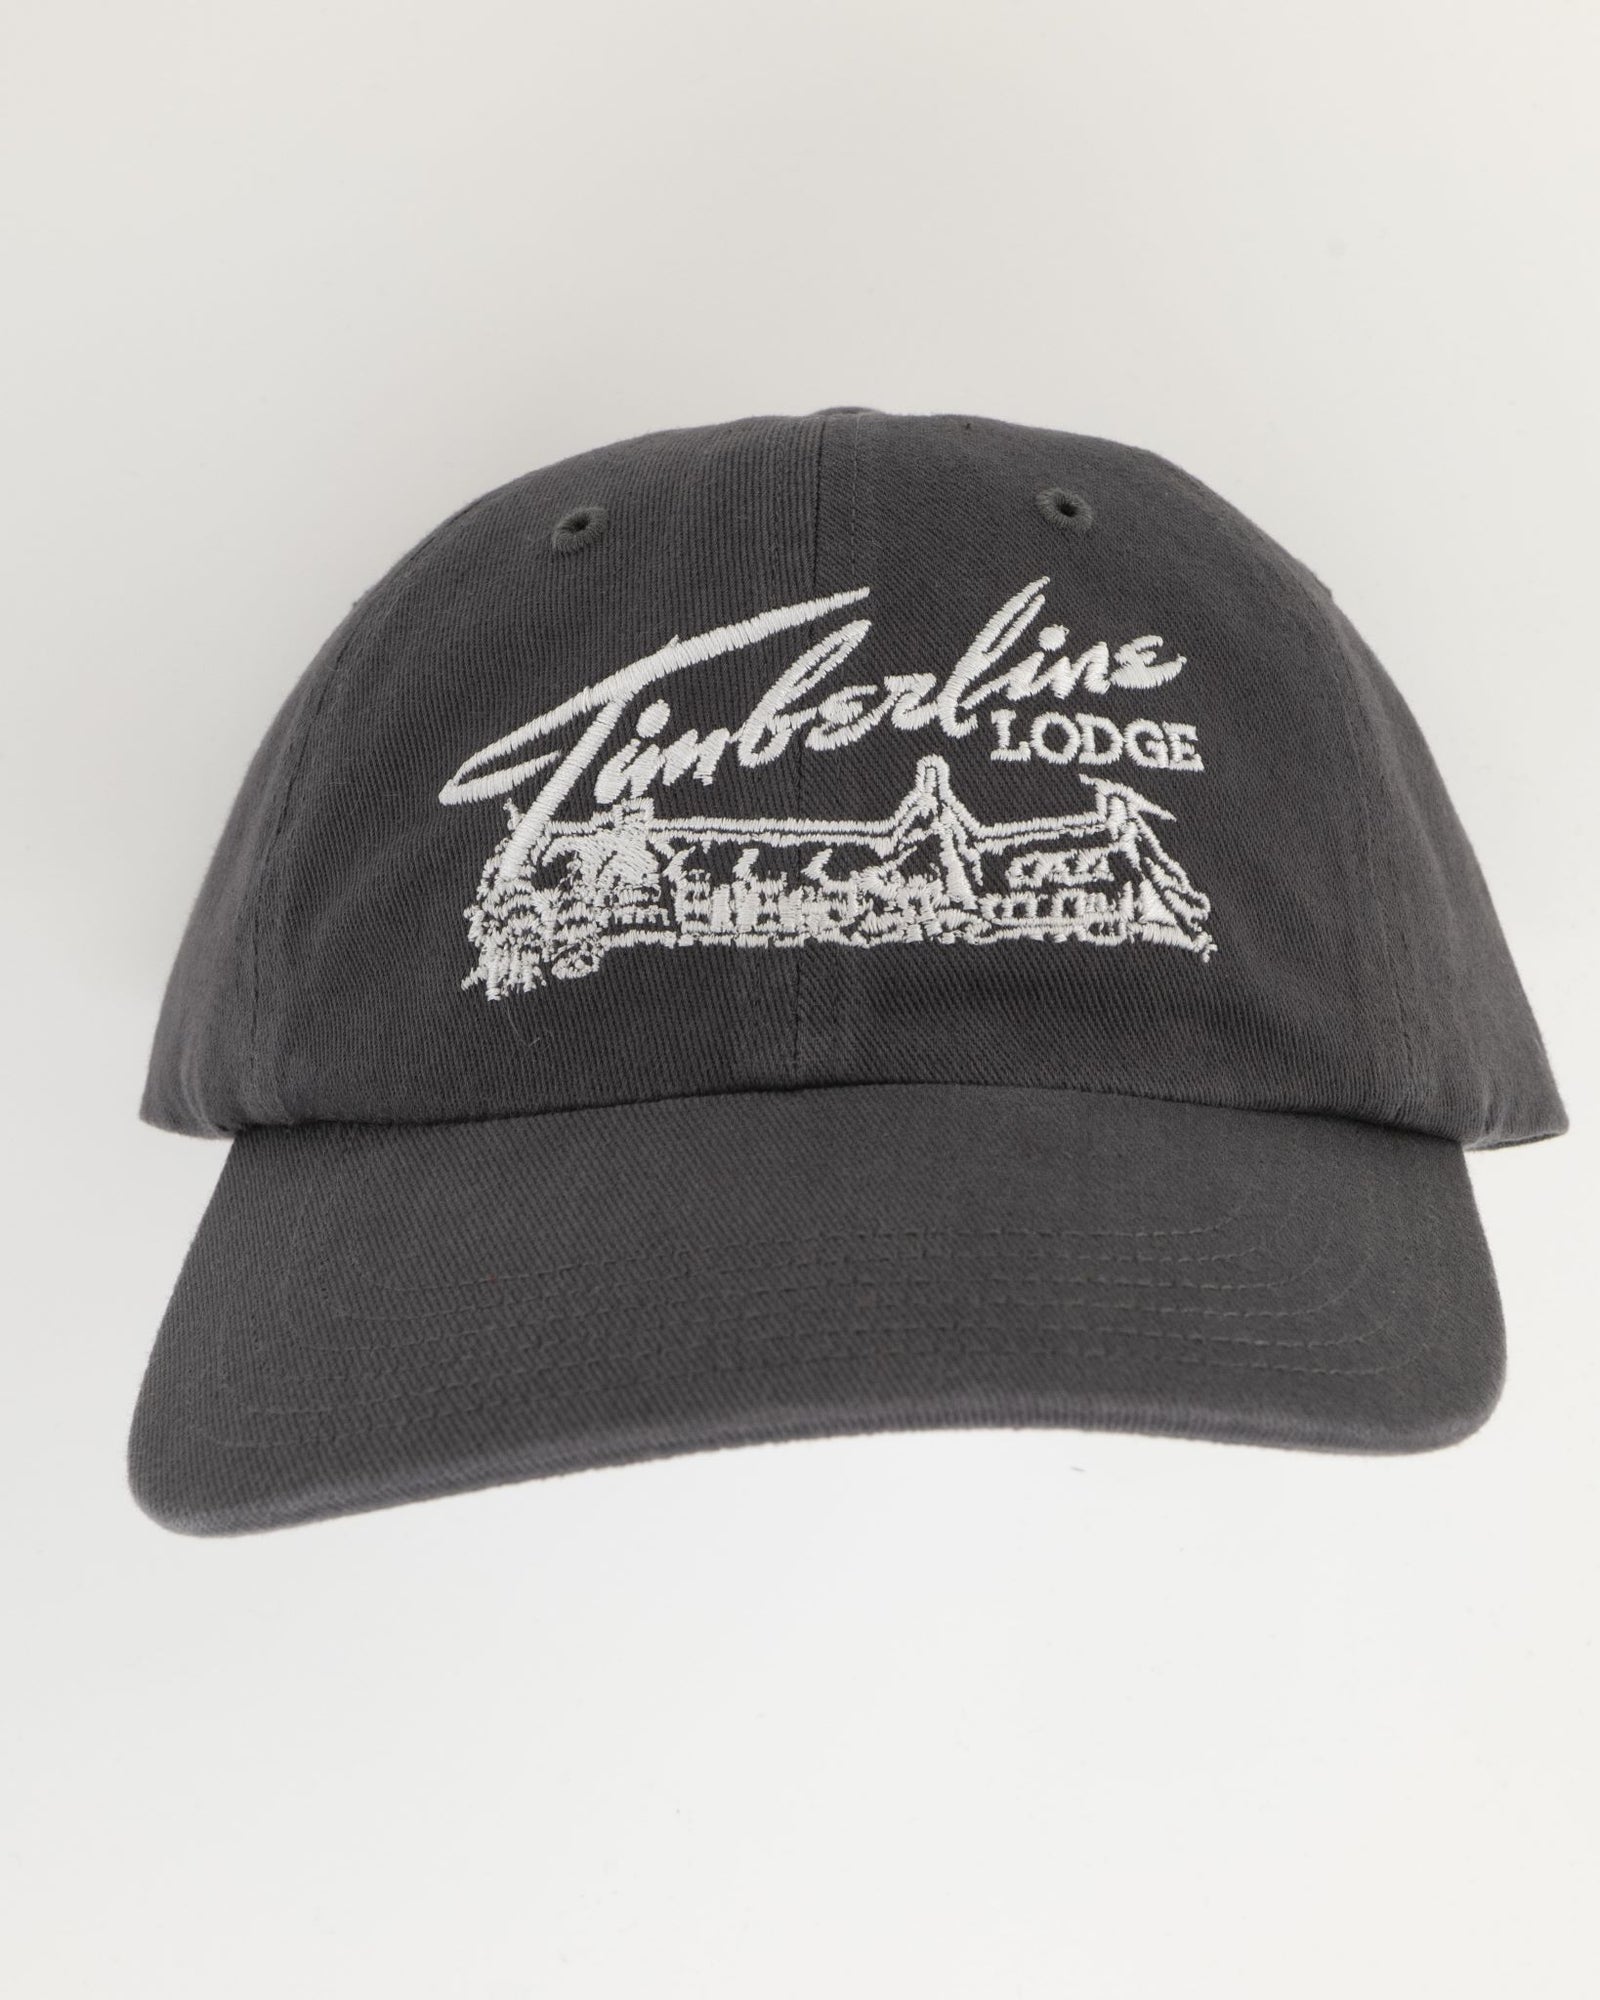 Hat - Iconic Cap - Online Navy Blue Timberline Store Lodge 